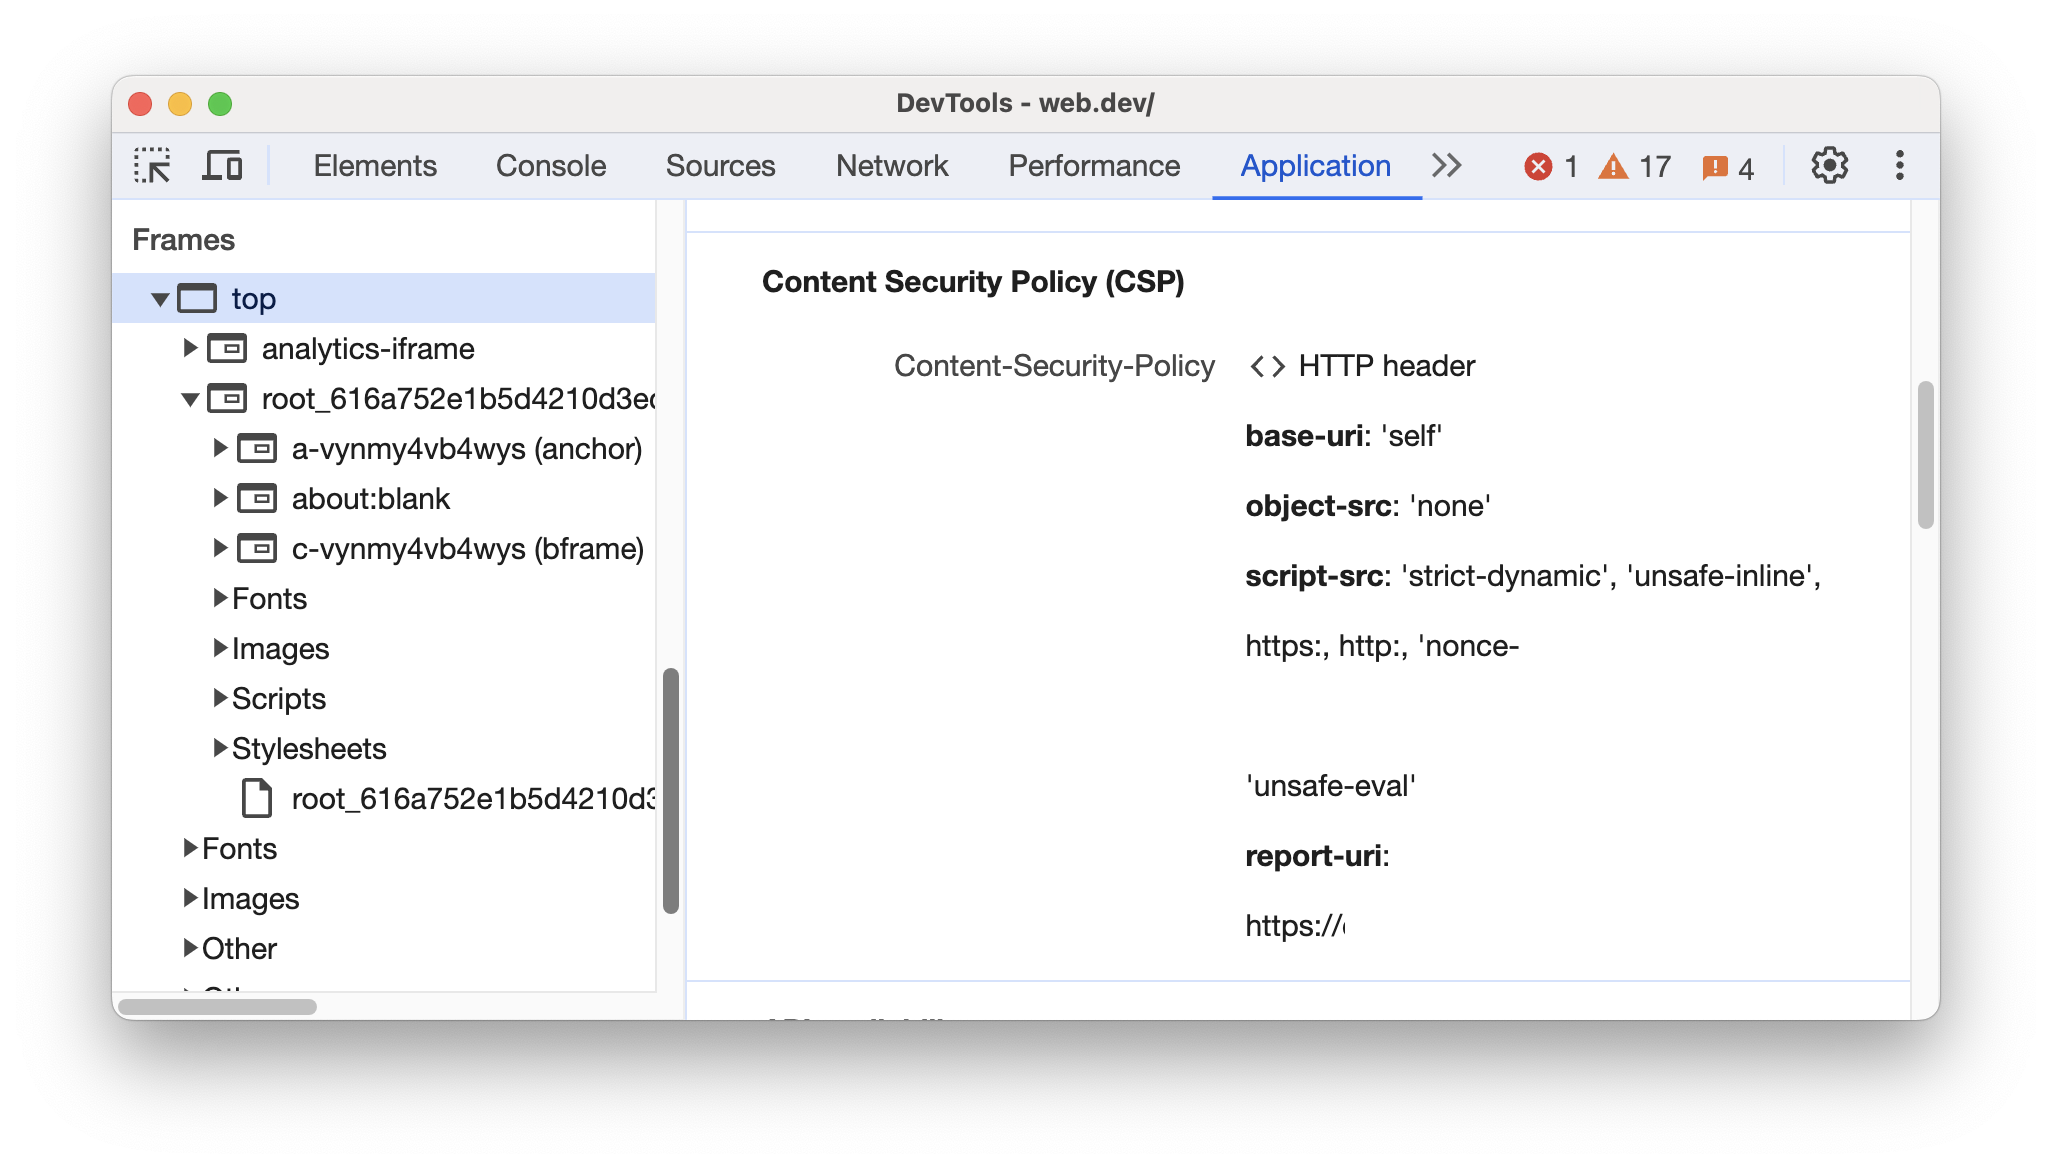 Section Content Security Policy (CSP)